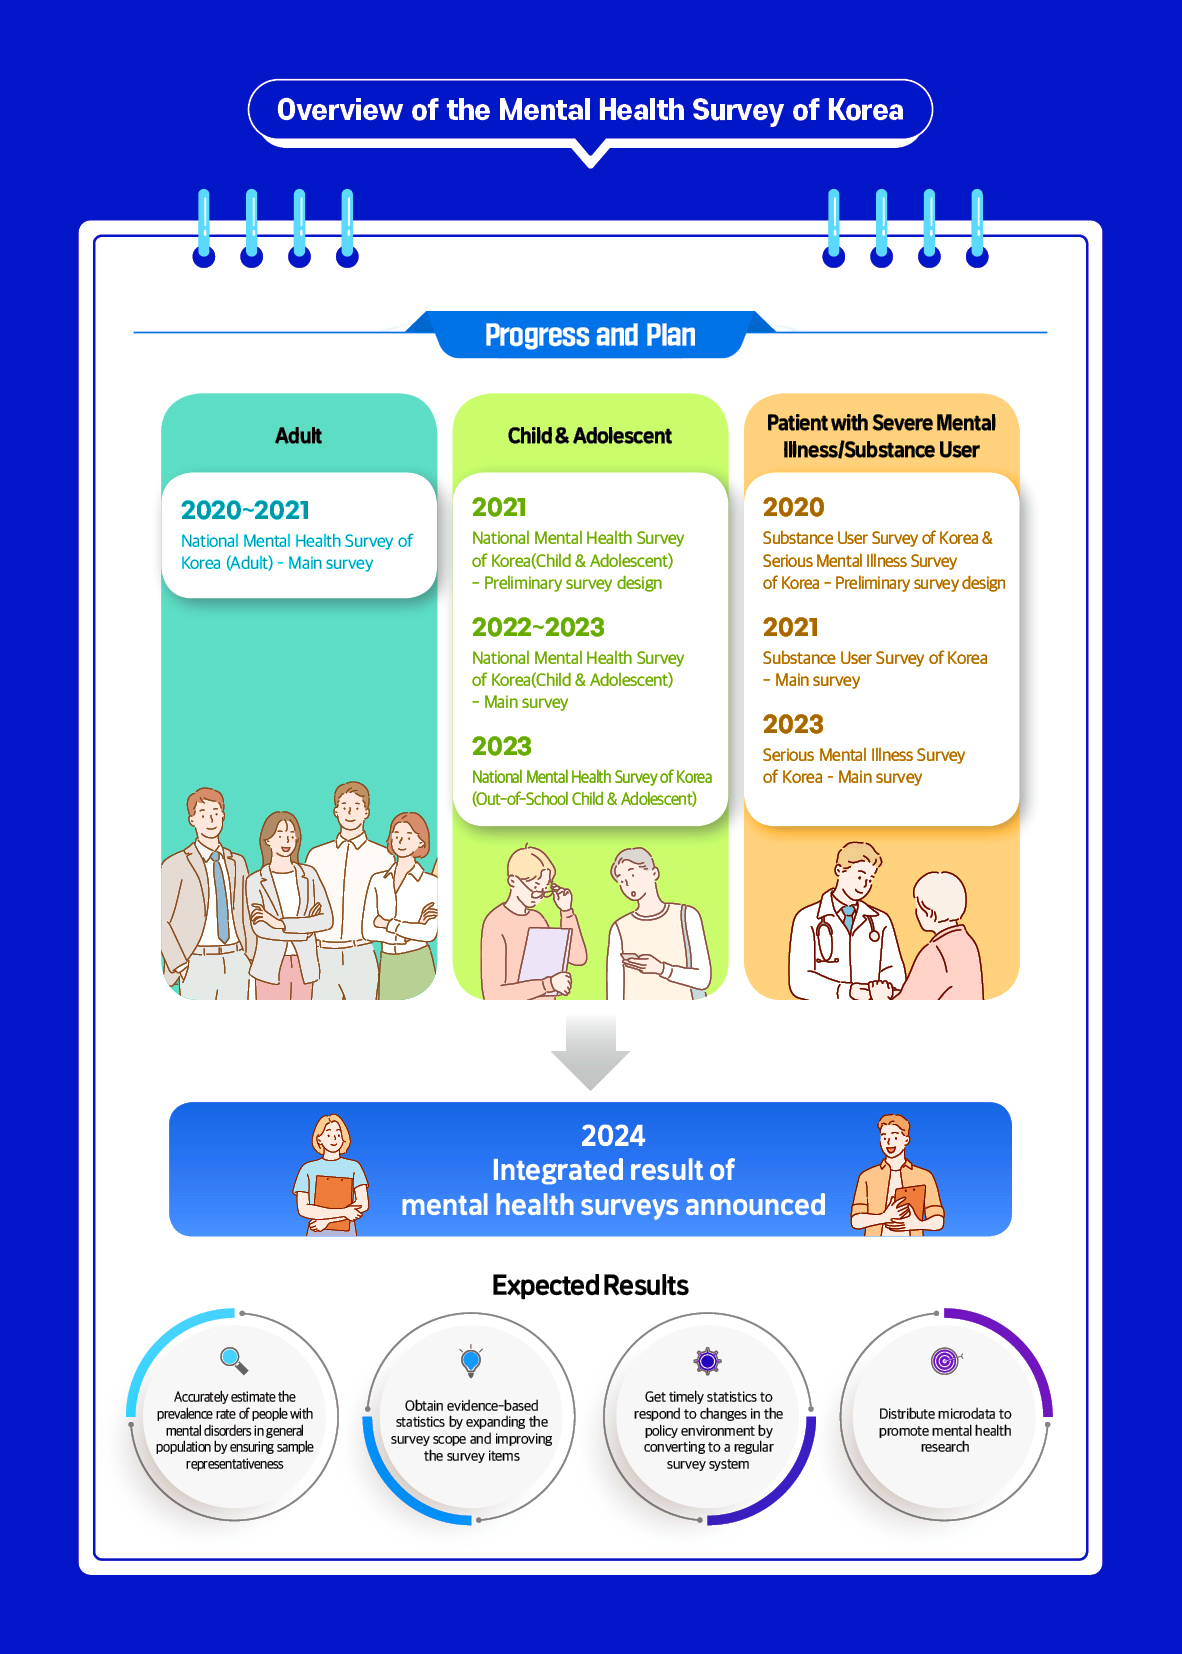 Overview of the Mental Health Survey of Korea